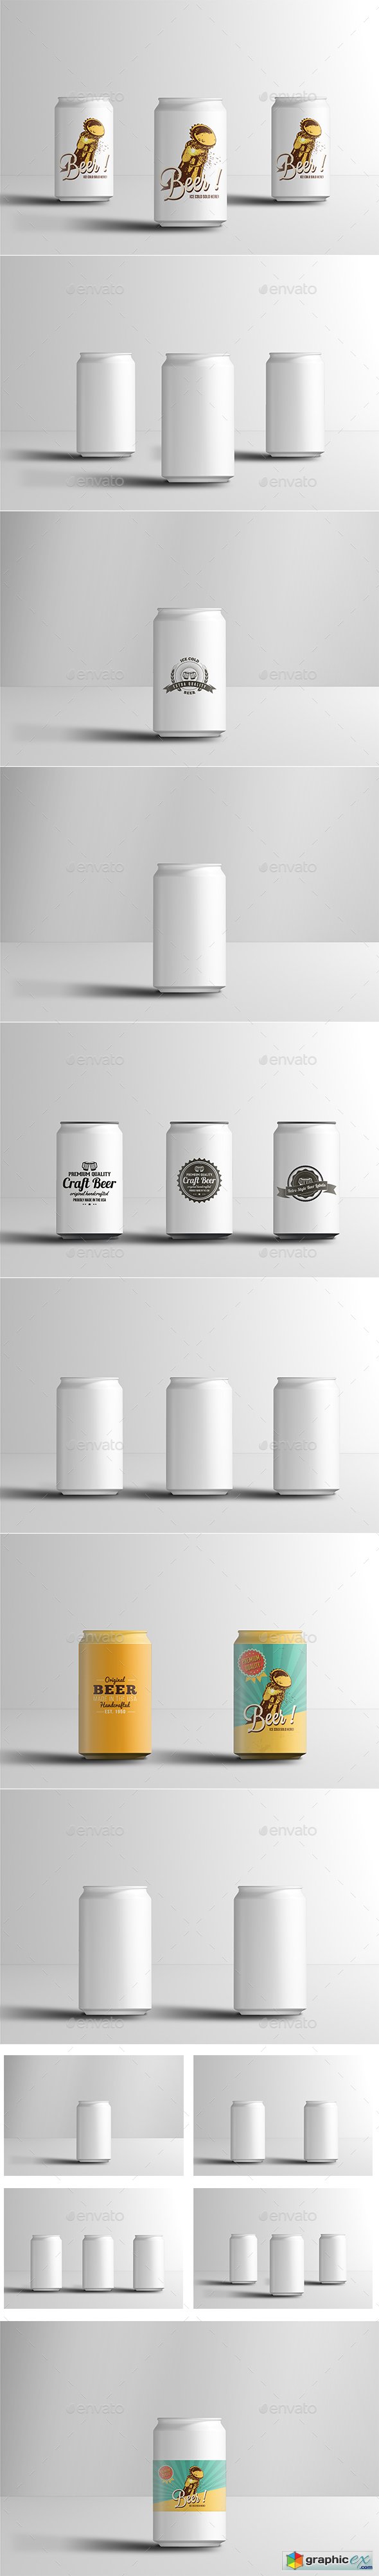 330ml Soda or Beer Can Mock-up